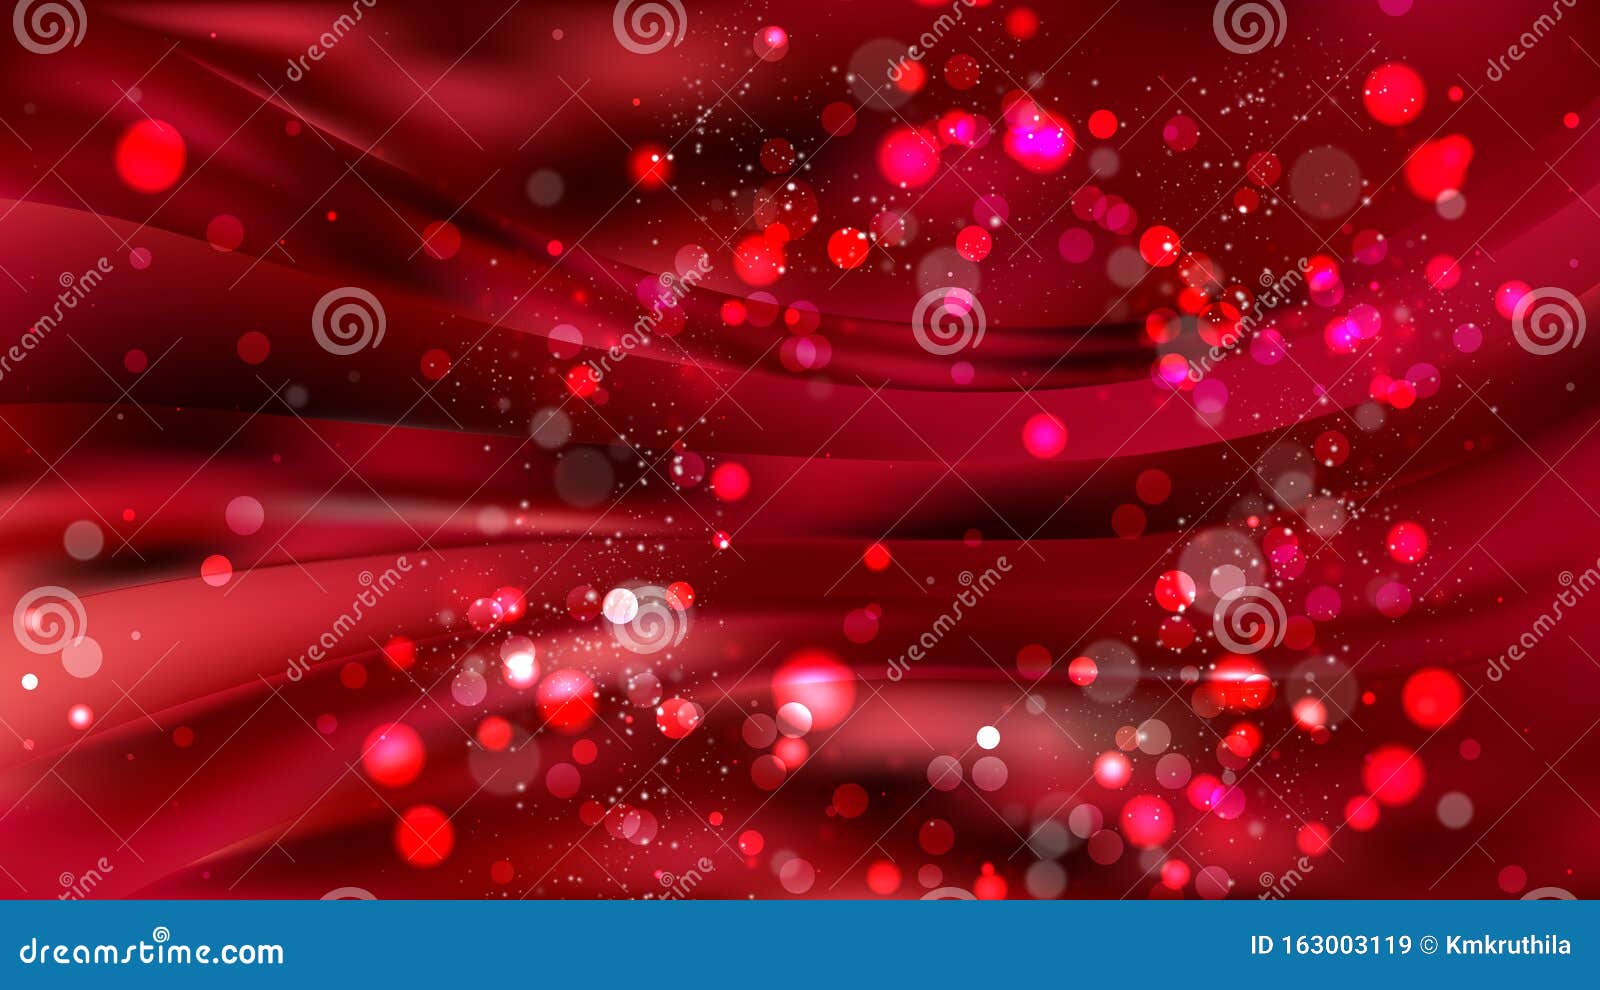 Abstract Red And Black Blurred Lights Background Stock Vector